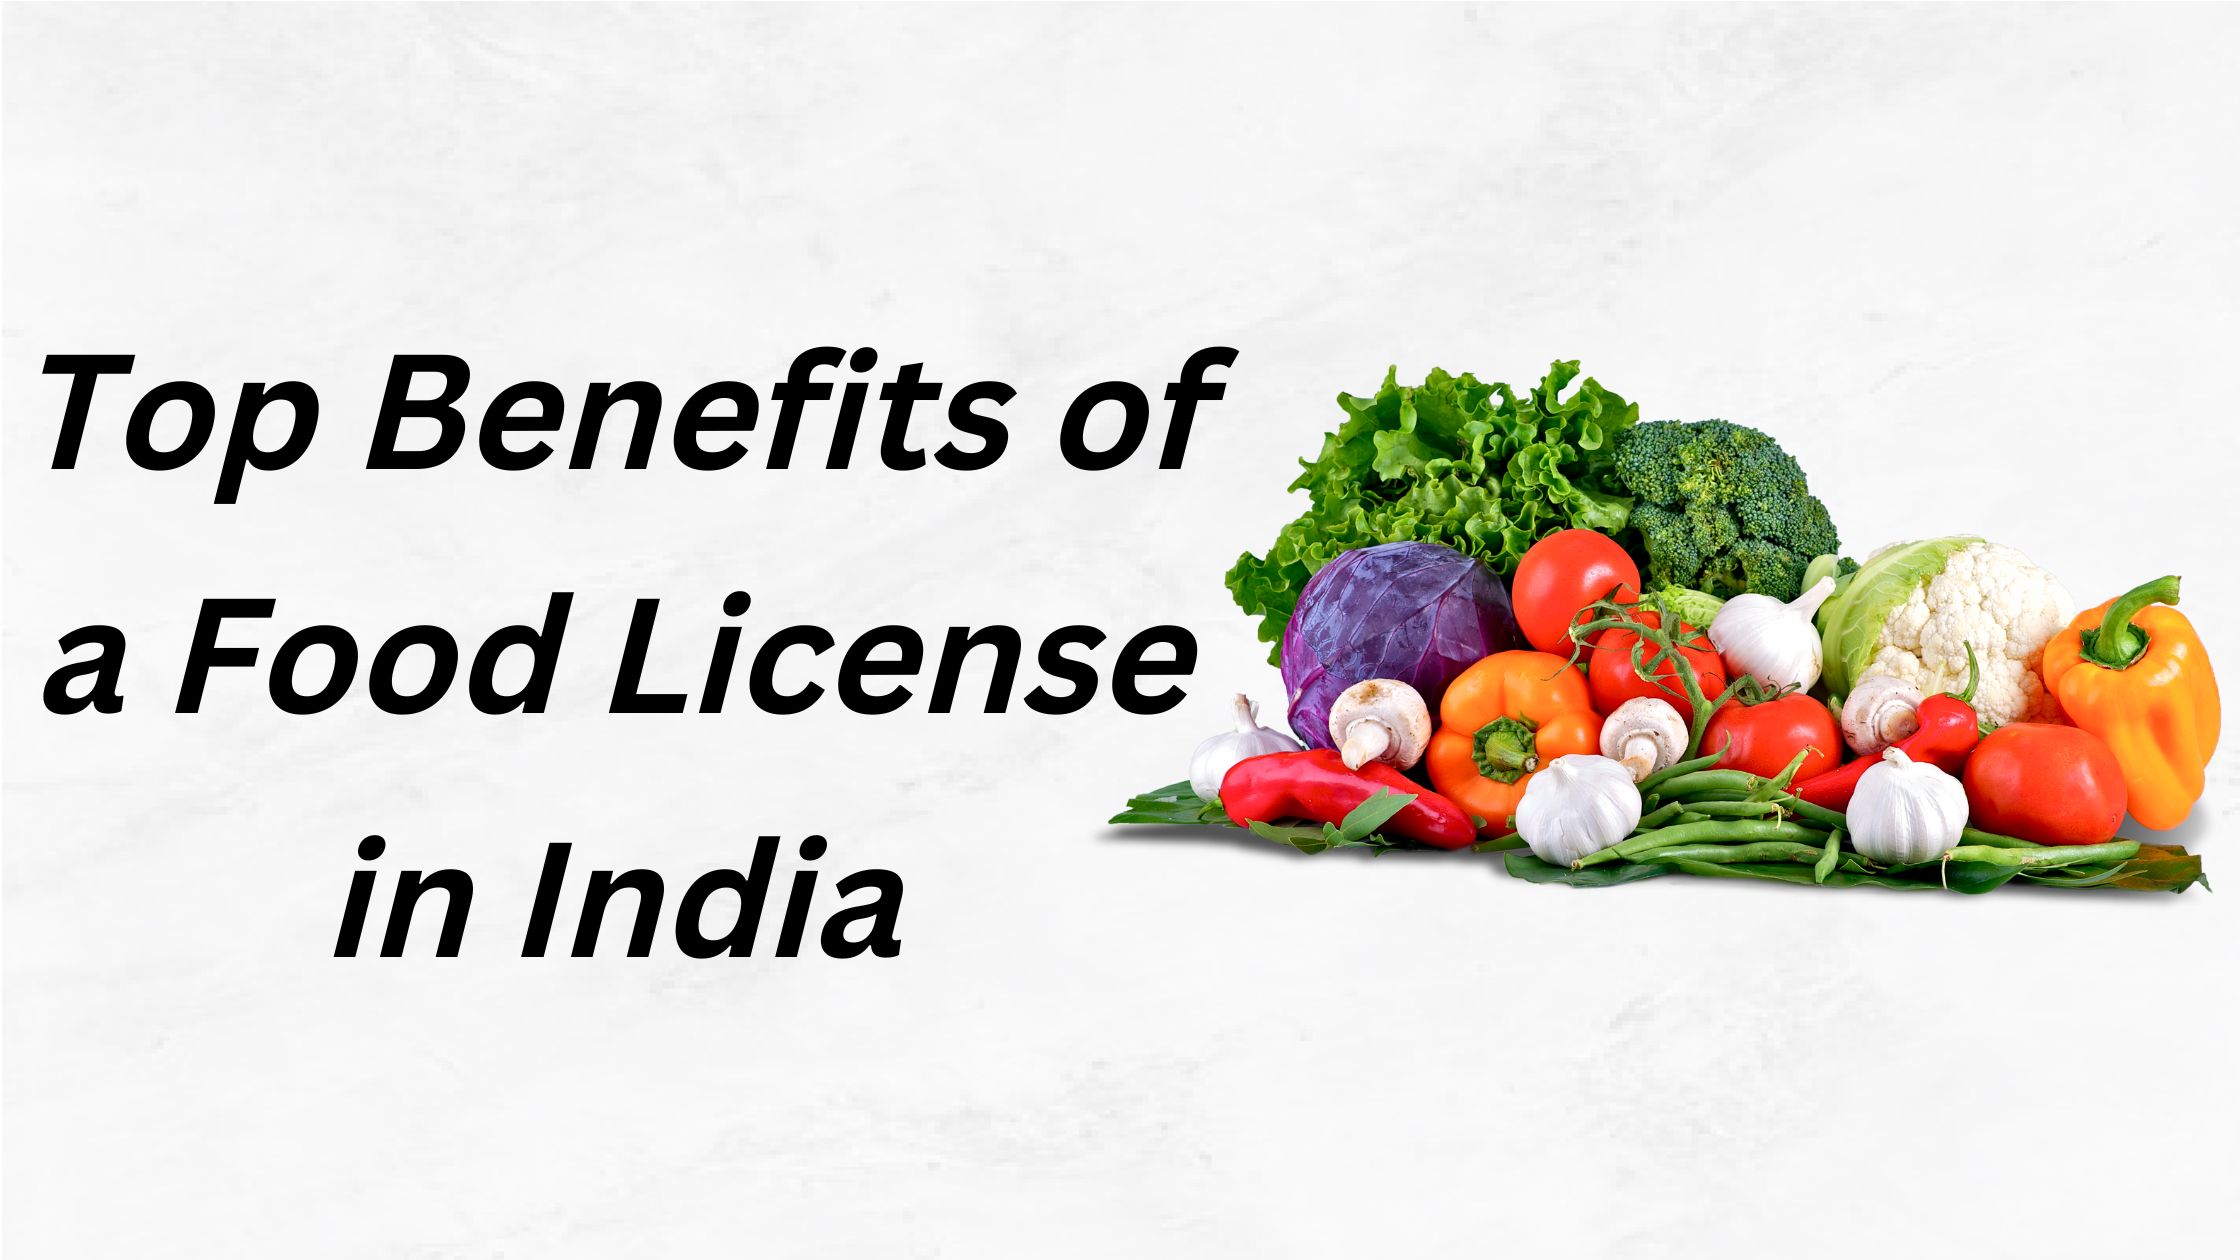 Top Benefits of a Food License in India